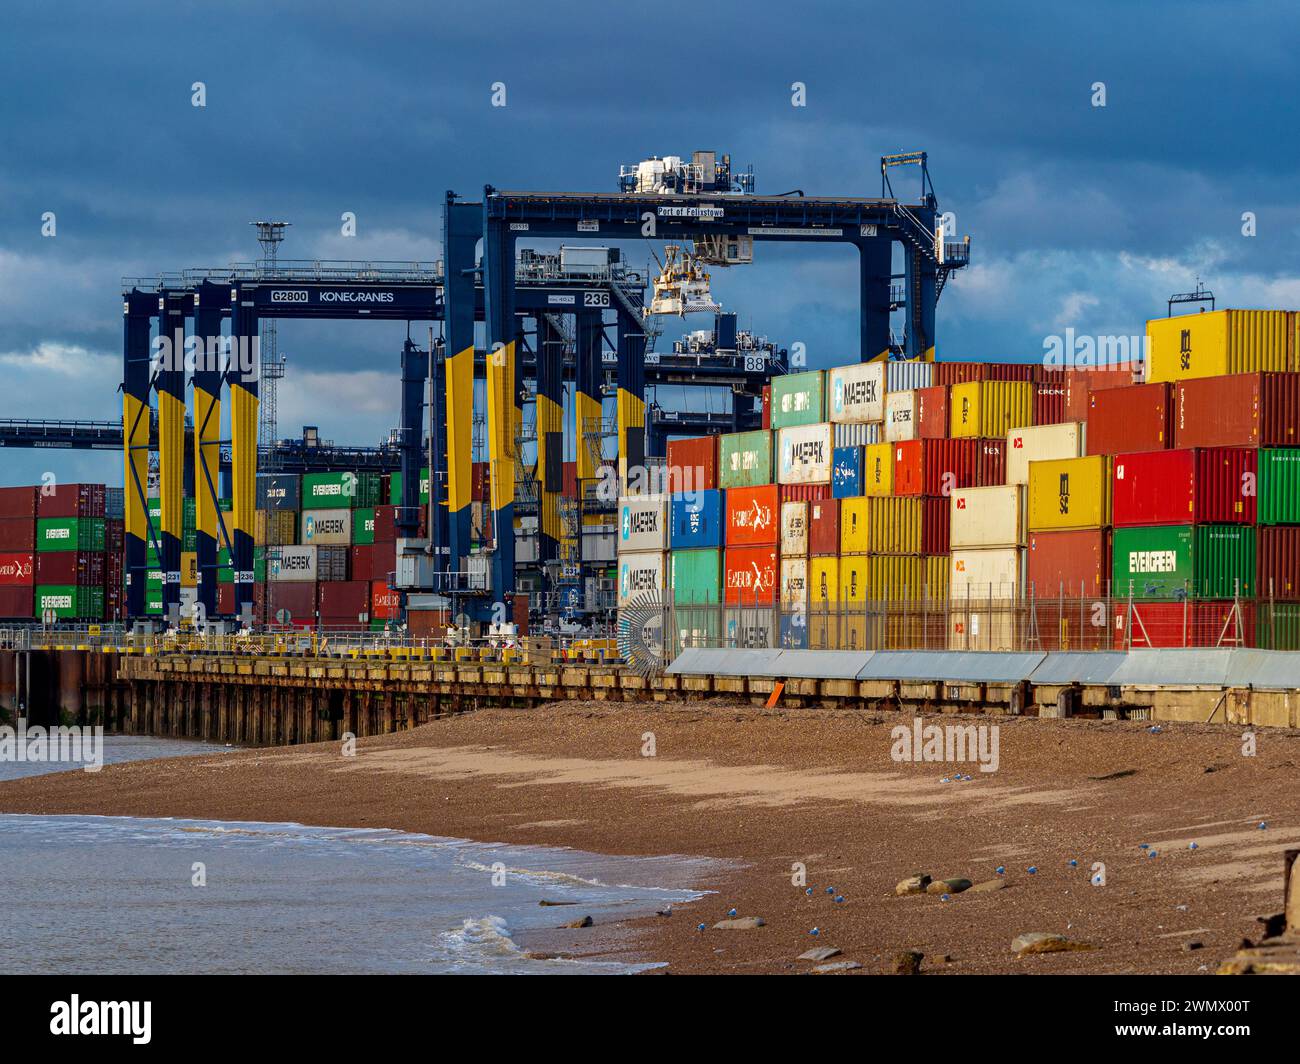 Shipping containers stacked at Felixstowe Port, the UK's largest Container Port. UK Exports. UK Imports. Stock Photo